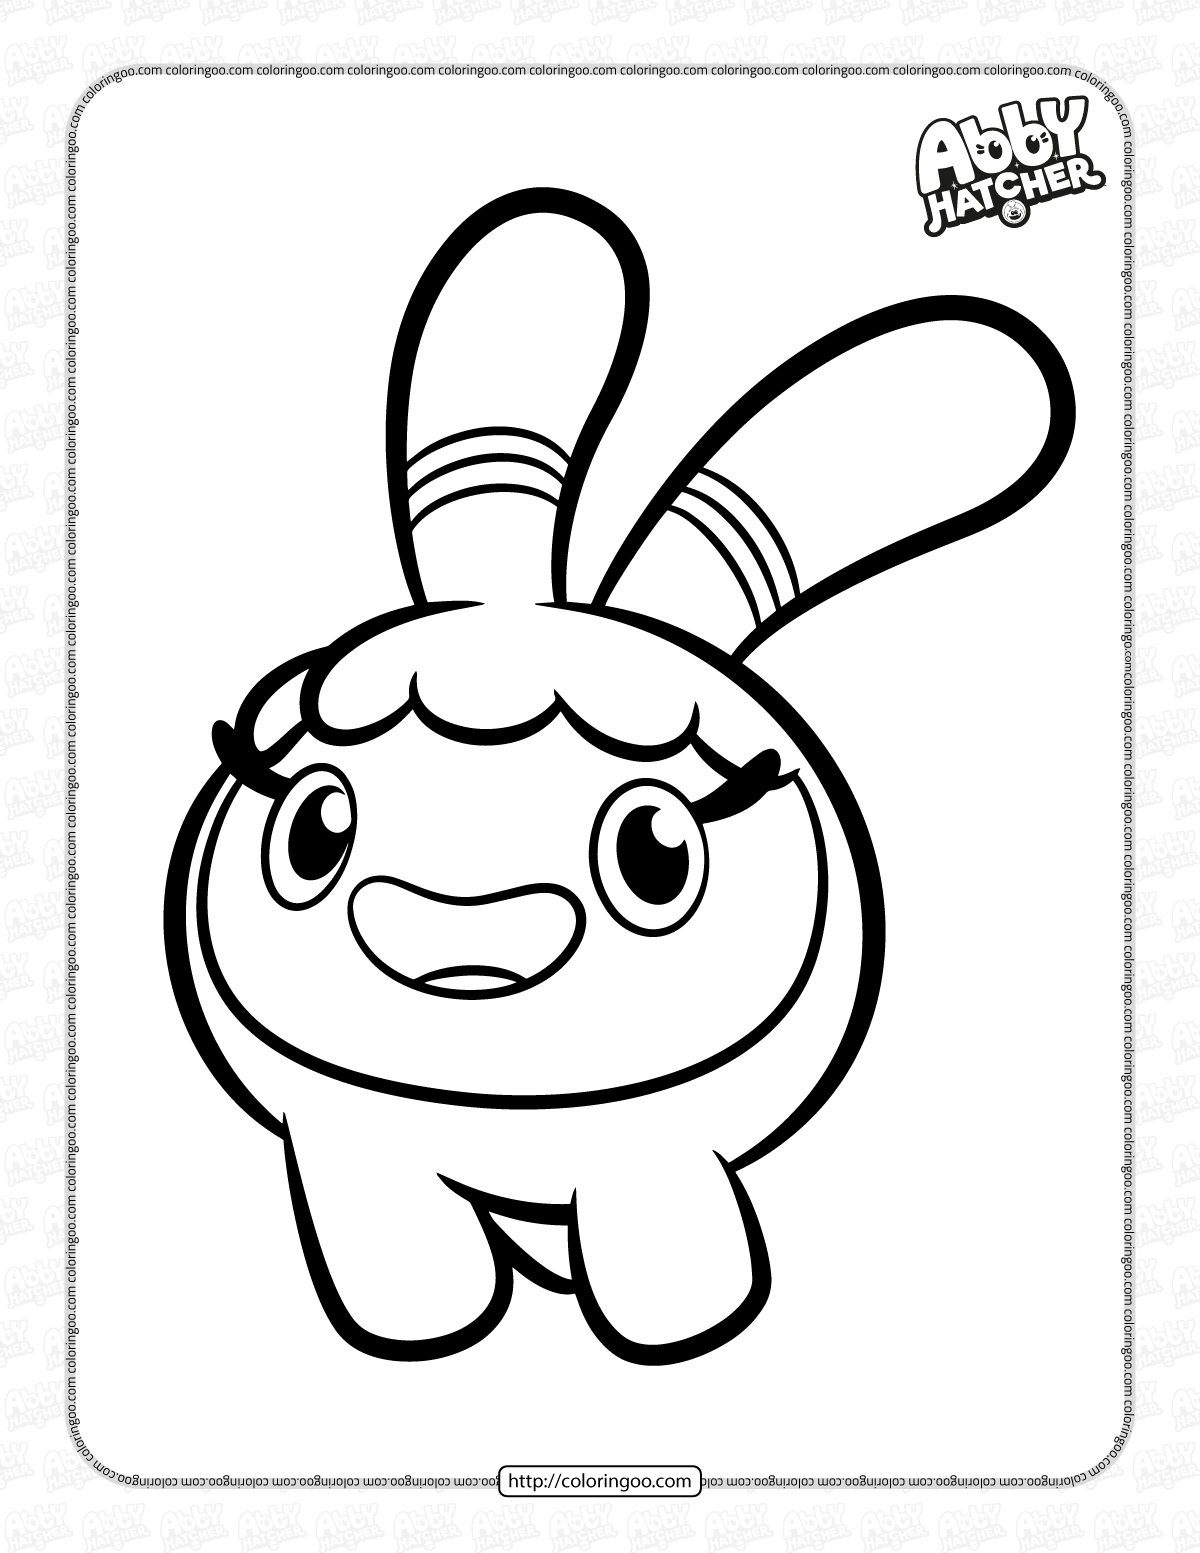 abby hatcher squeaky peeper coloring pages